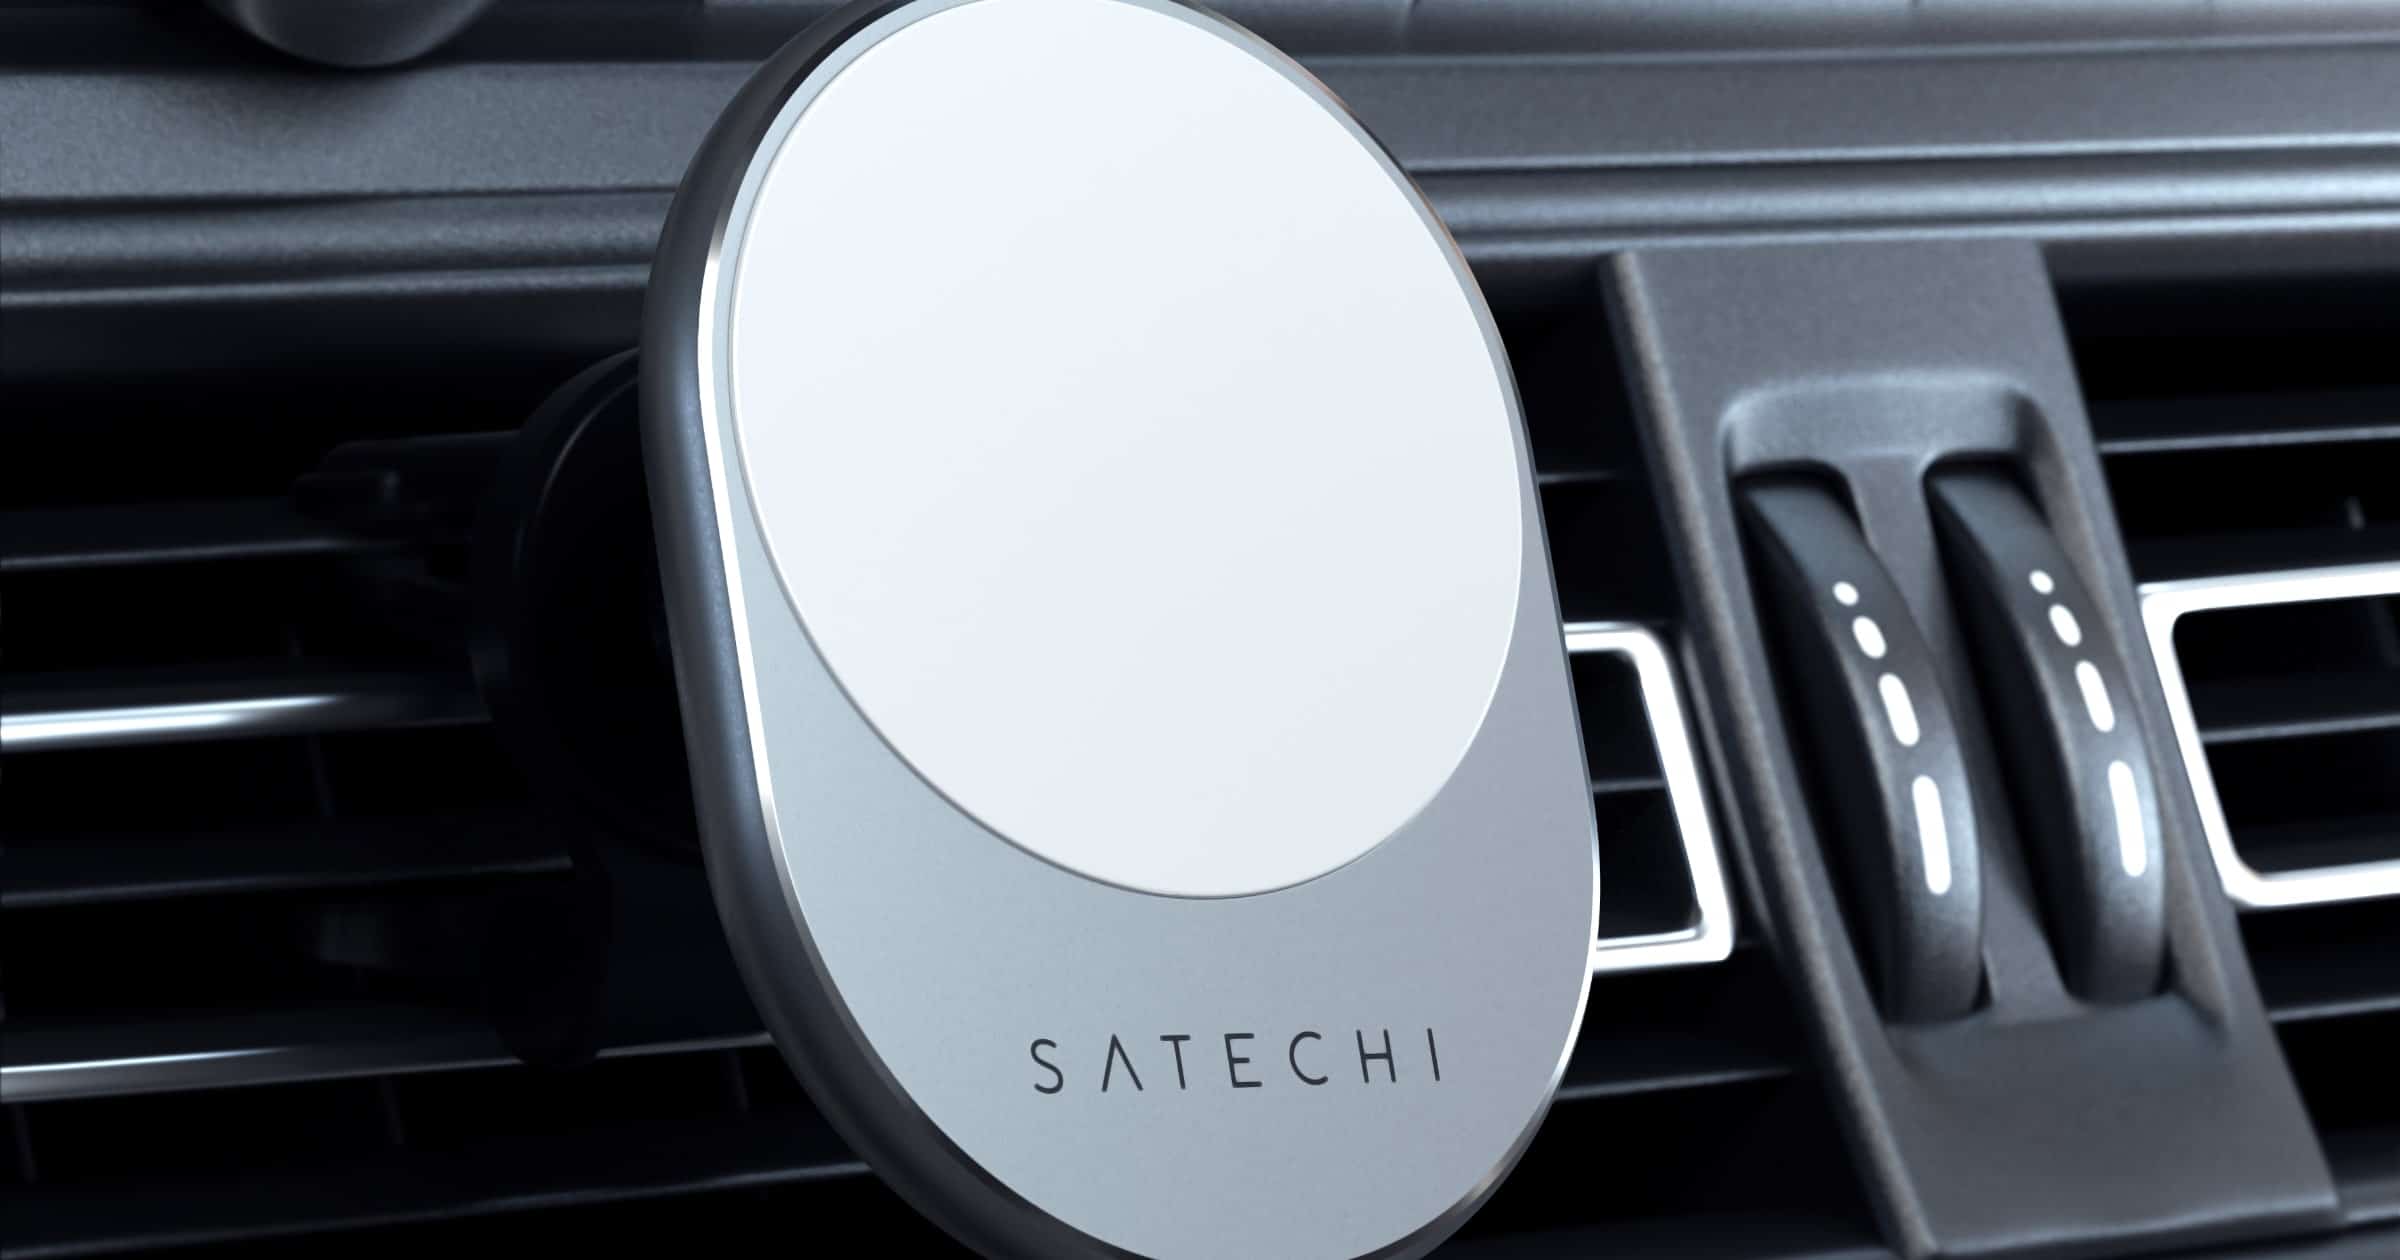 Satechi Launches Three Compact Chargers in Time for iPhone 13